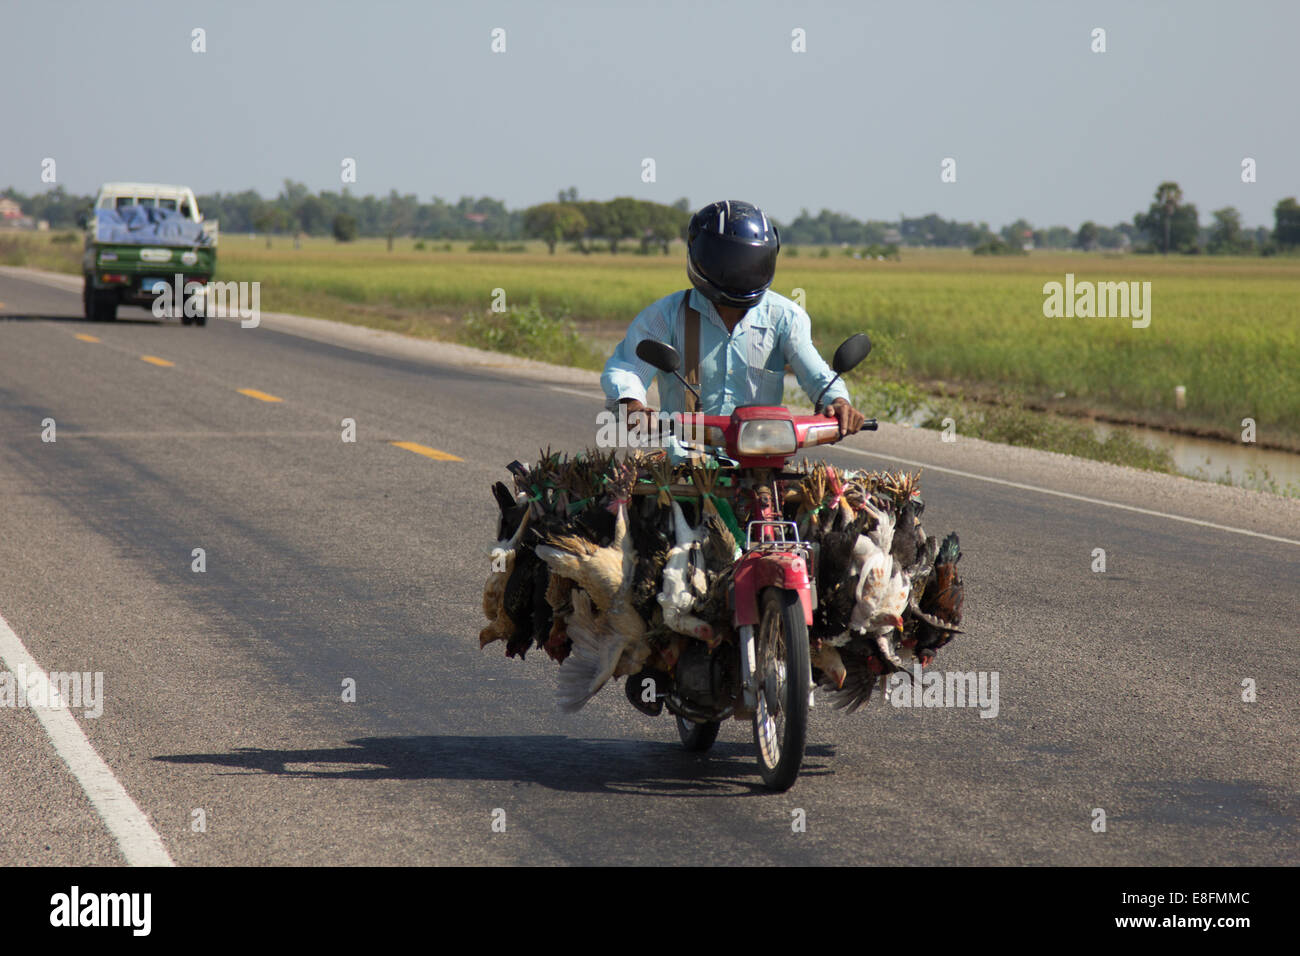 Cambodia, Siem Reap, Chickens transported by motorbike in Cambodia Stock Photo